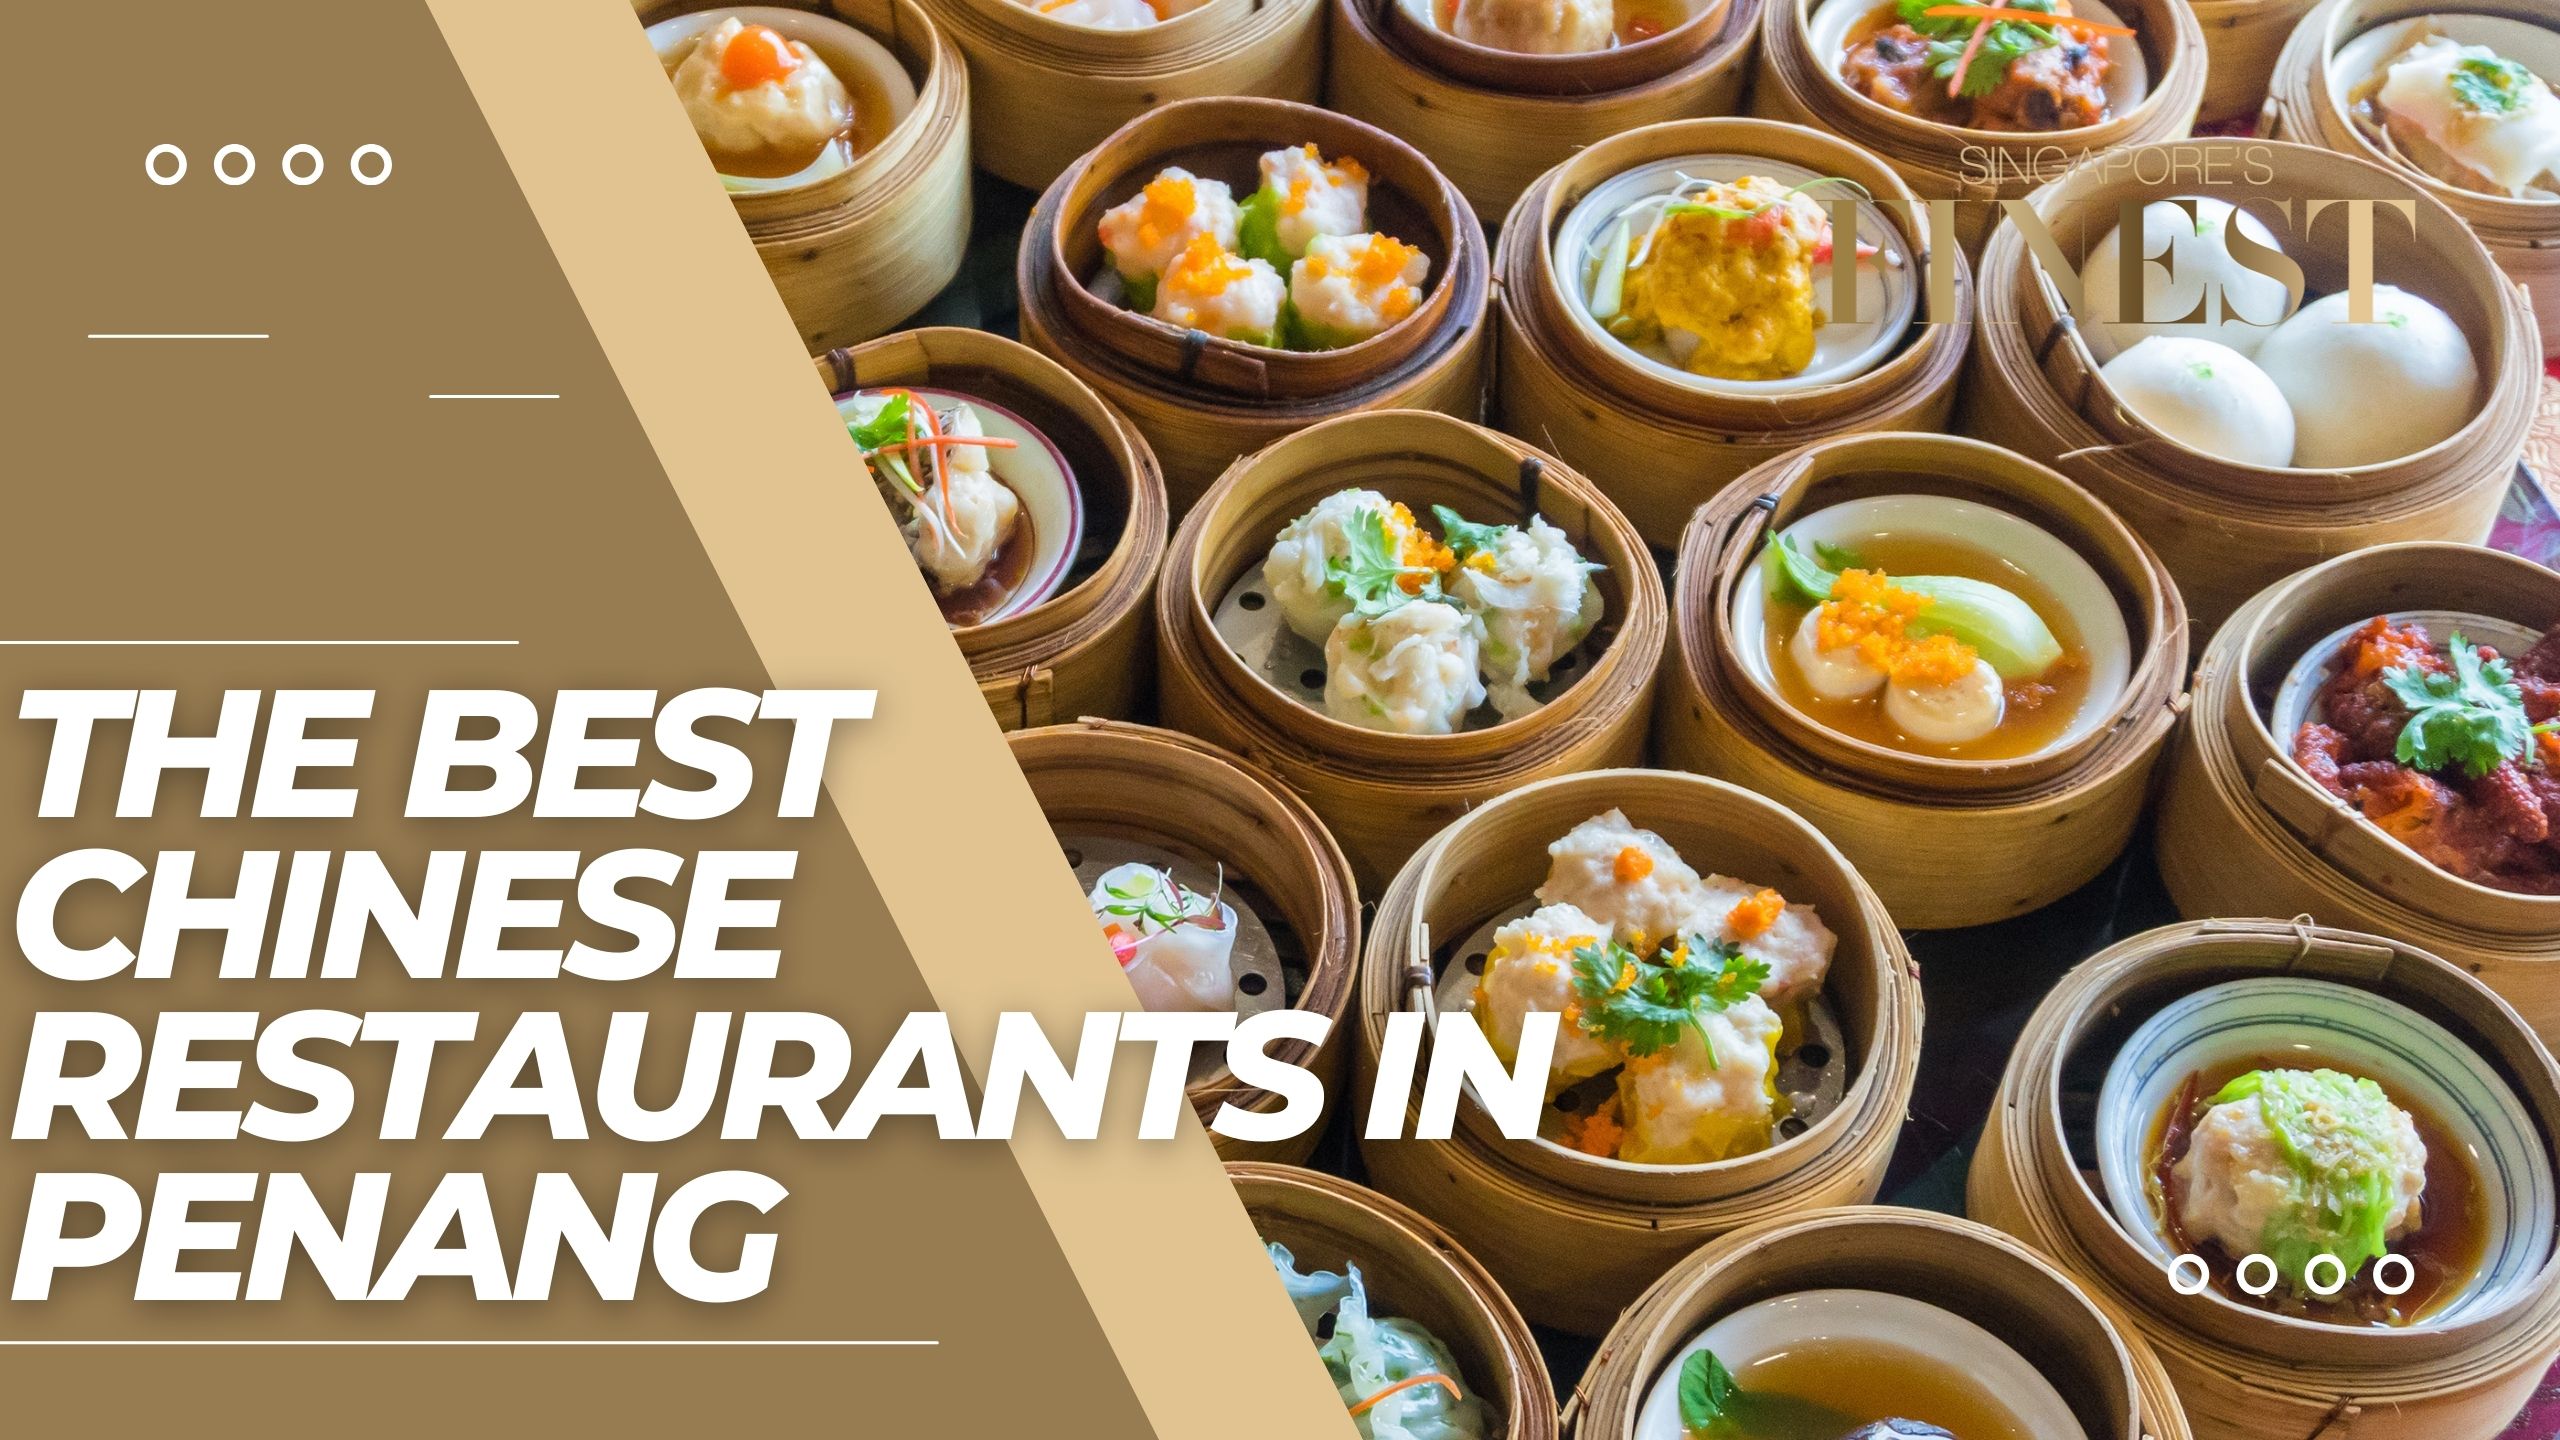 The Finest Chinese Restaurants in Penang